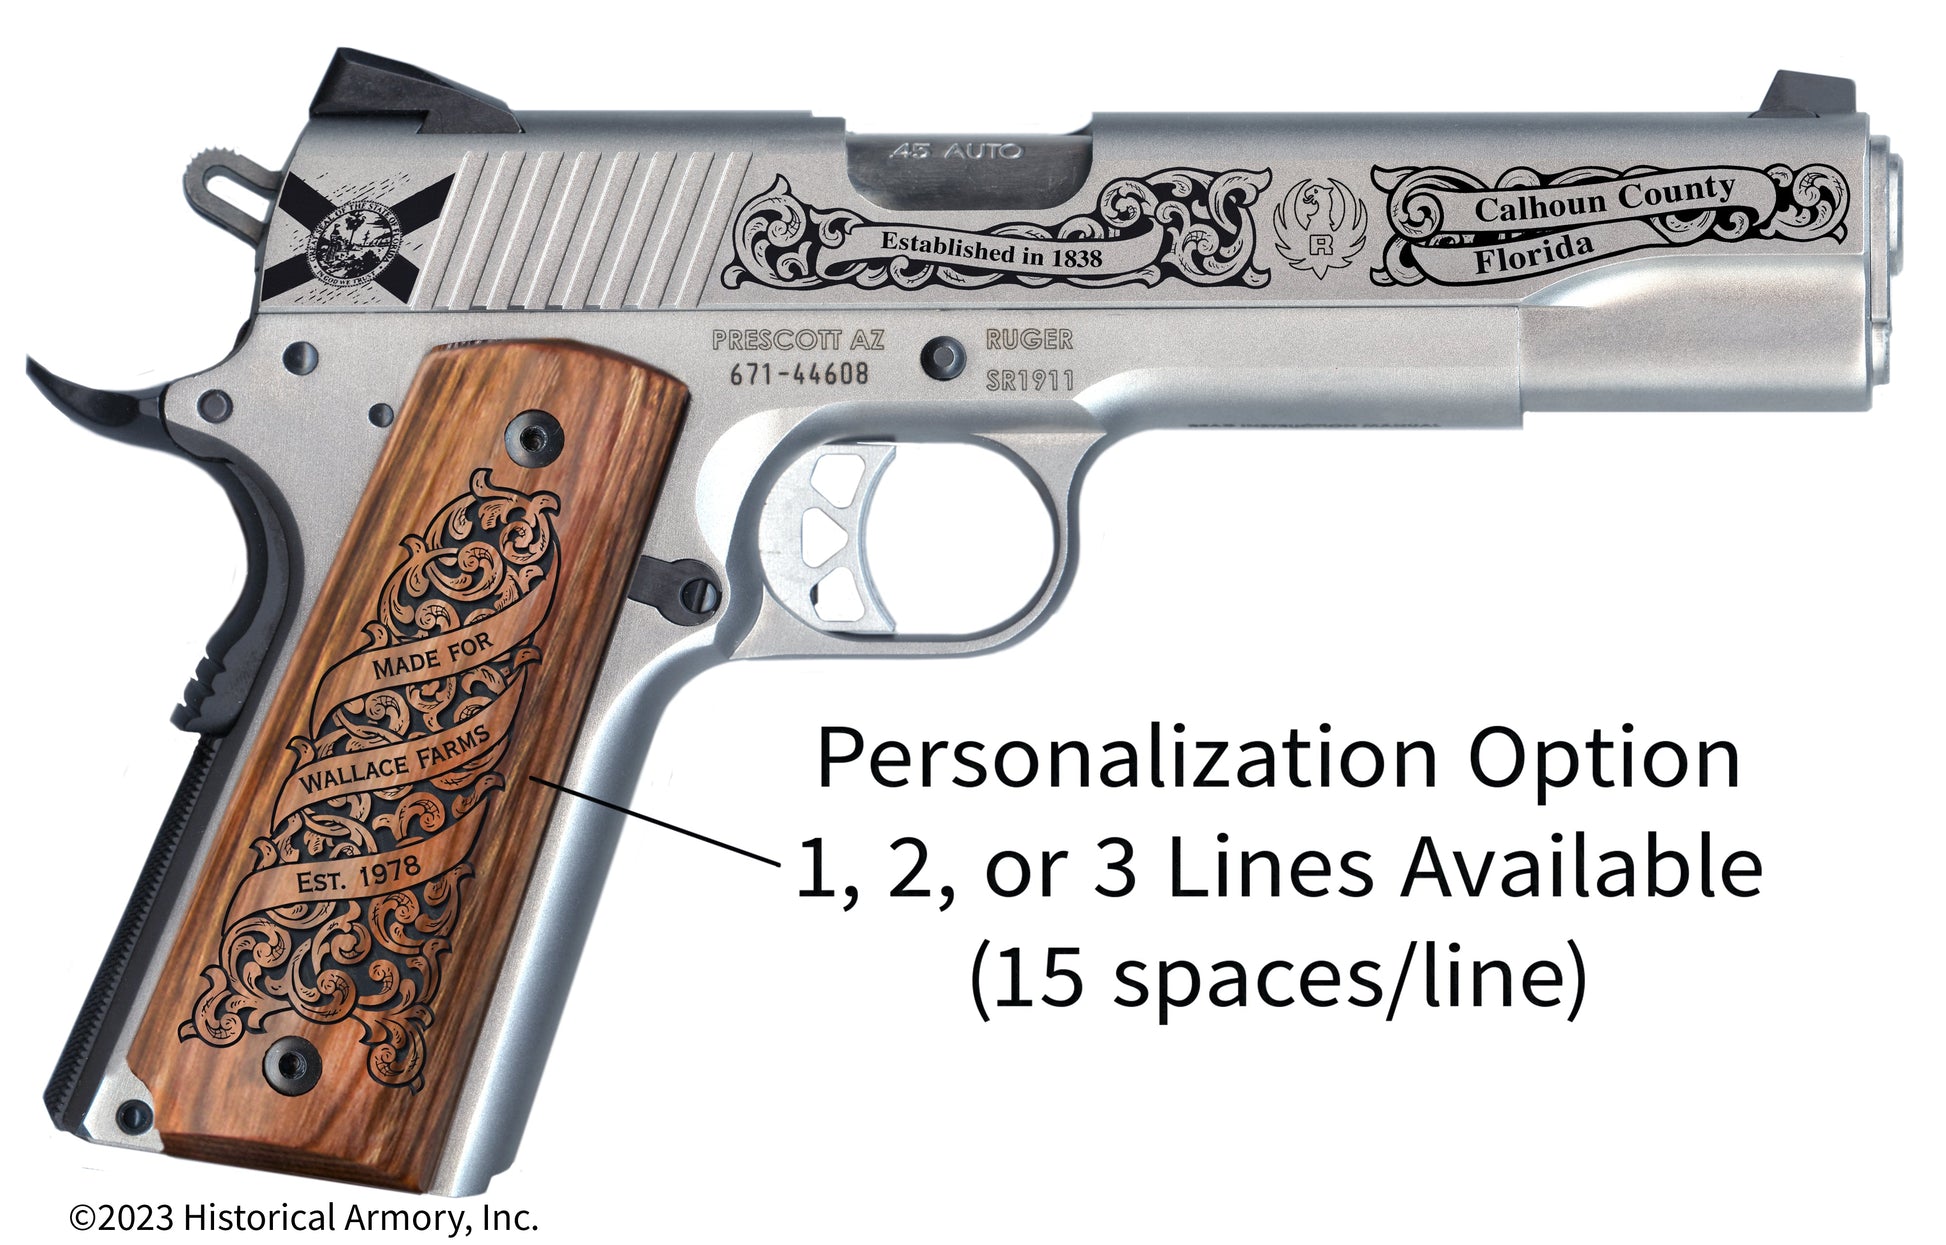 Calhoun County Florida Personalized Engraved .45 Auto Ruger 1911